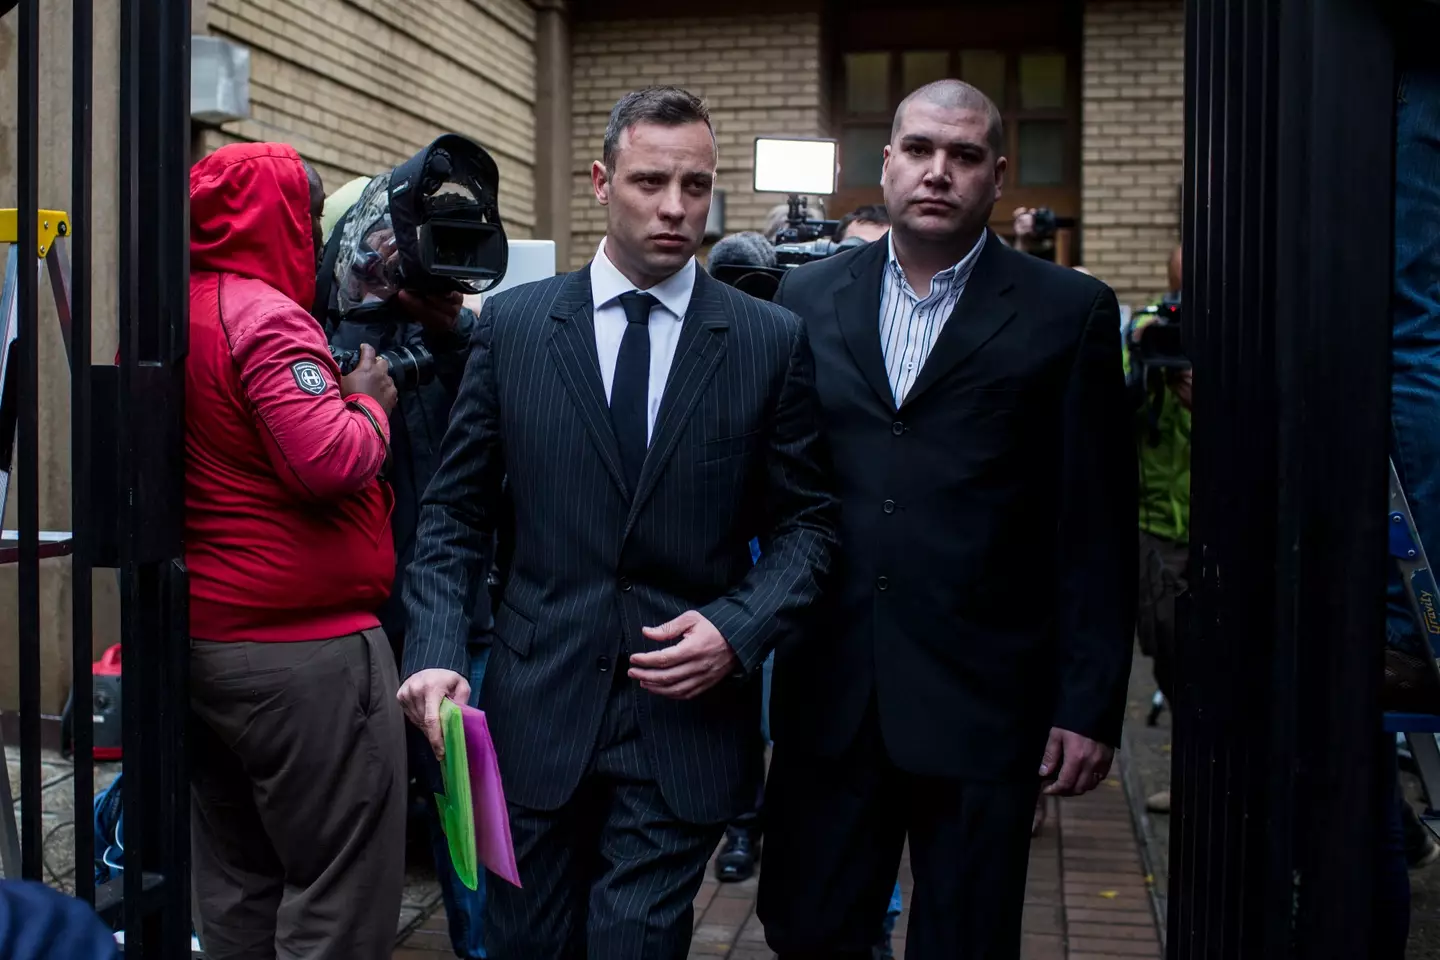 Pistorius claimed he thought the person he shot was an intruder in the house.